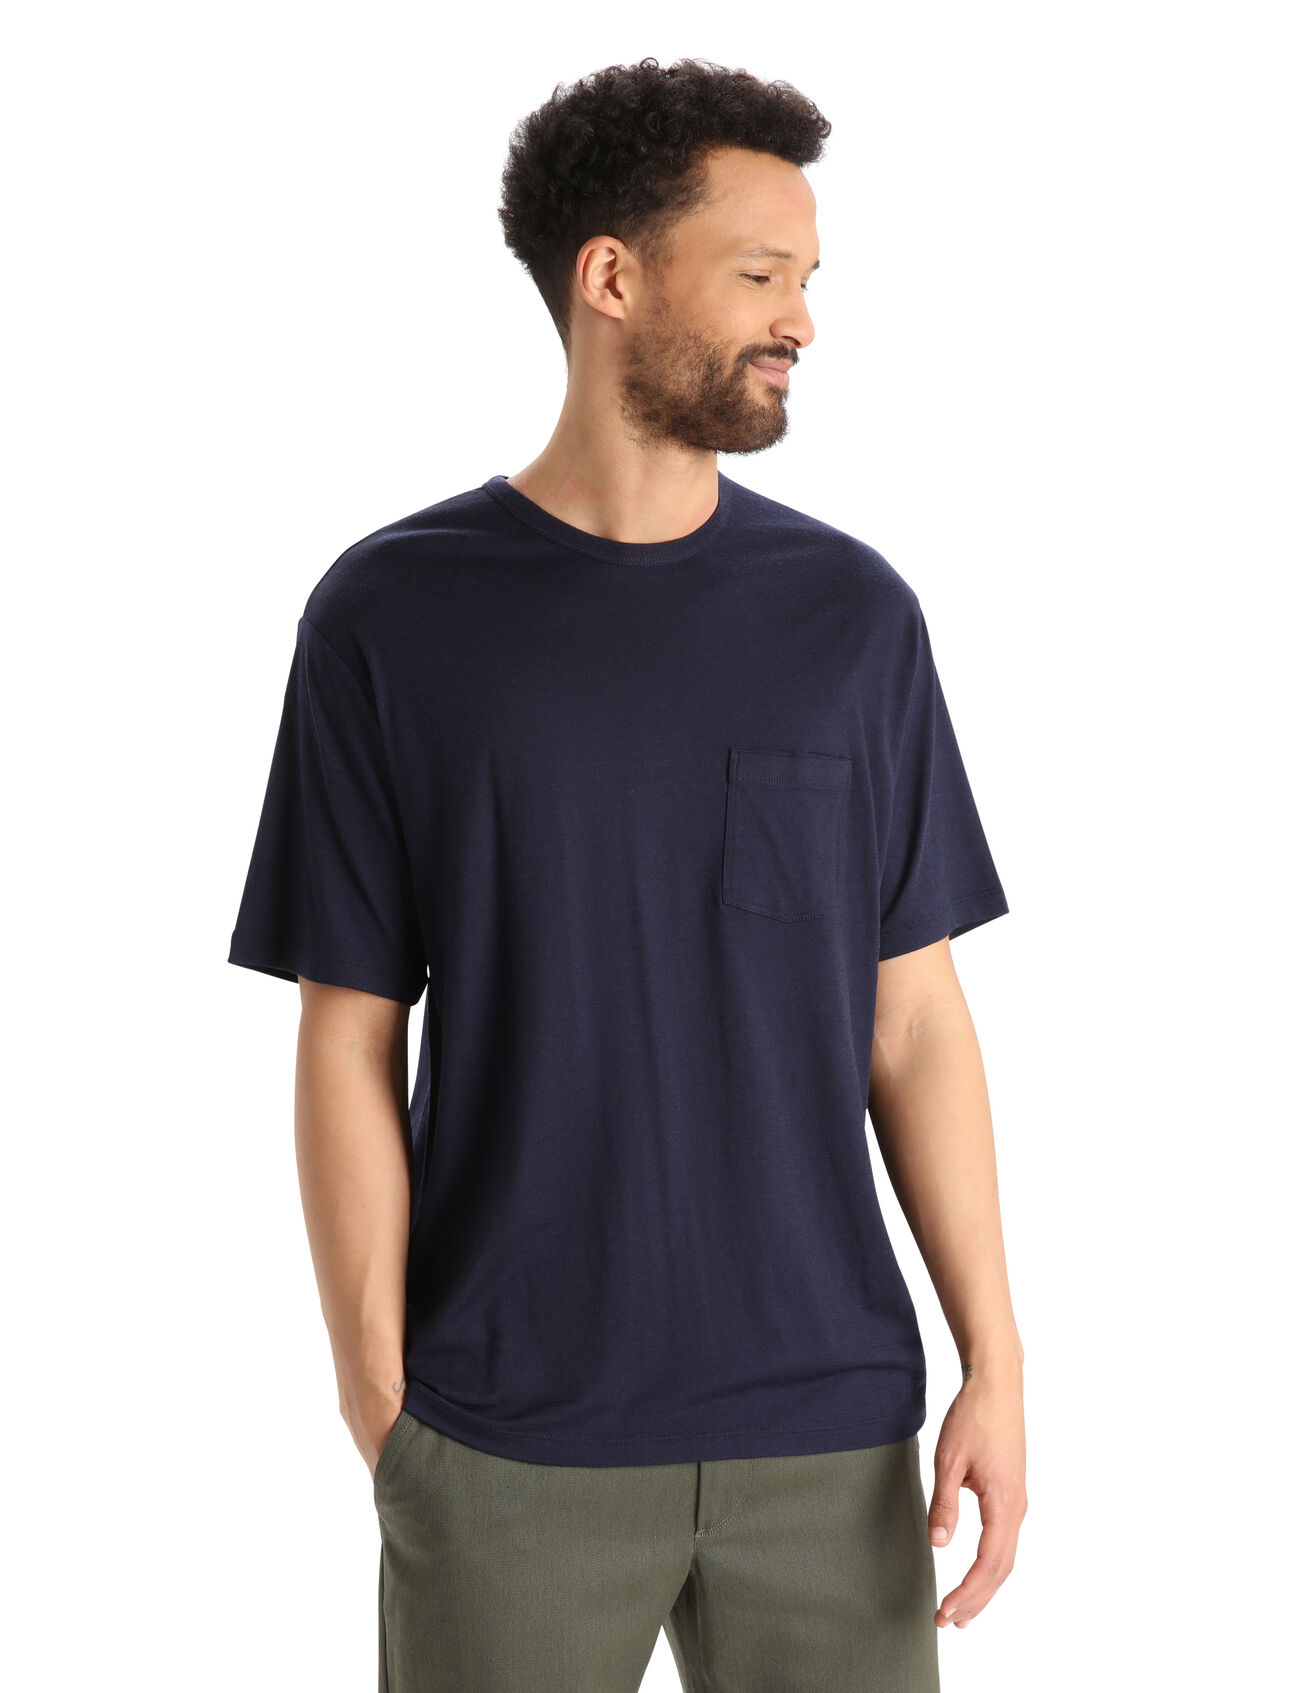 Pánské Merino Granary Short Sleeve Pocket T-Shirt A classic pocket tee with a relaxed fit and soft, breathable, 100% merino wool fabric, the Granary Short Sleeve Pocket Tee is all about everyday comfort and style.